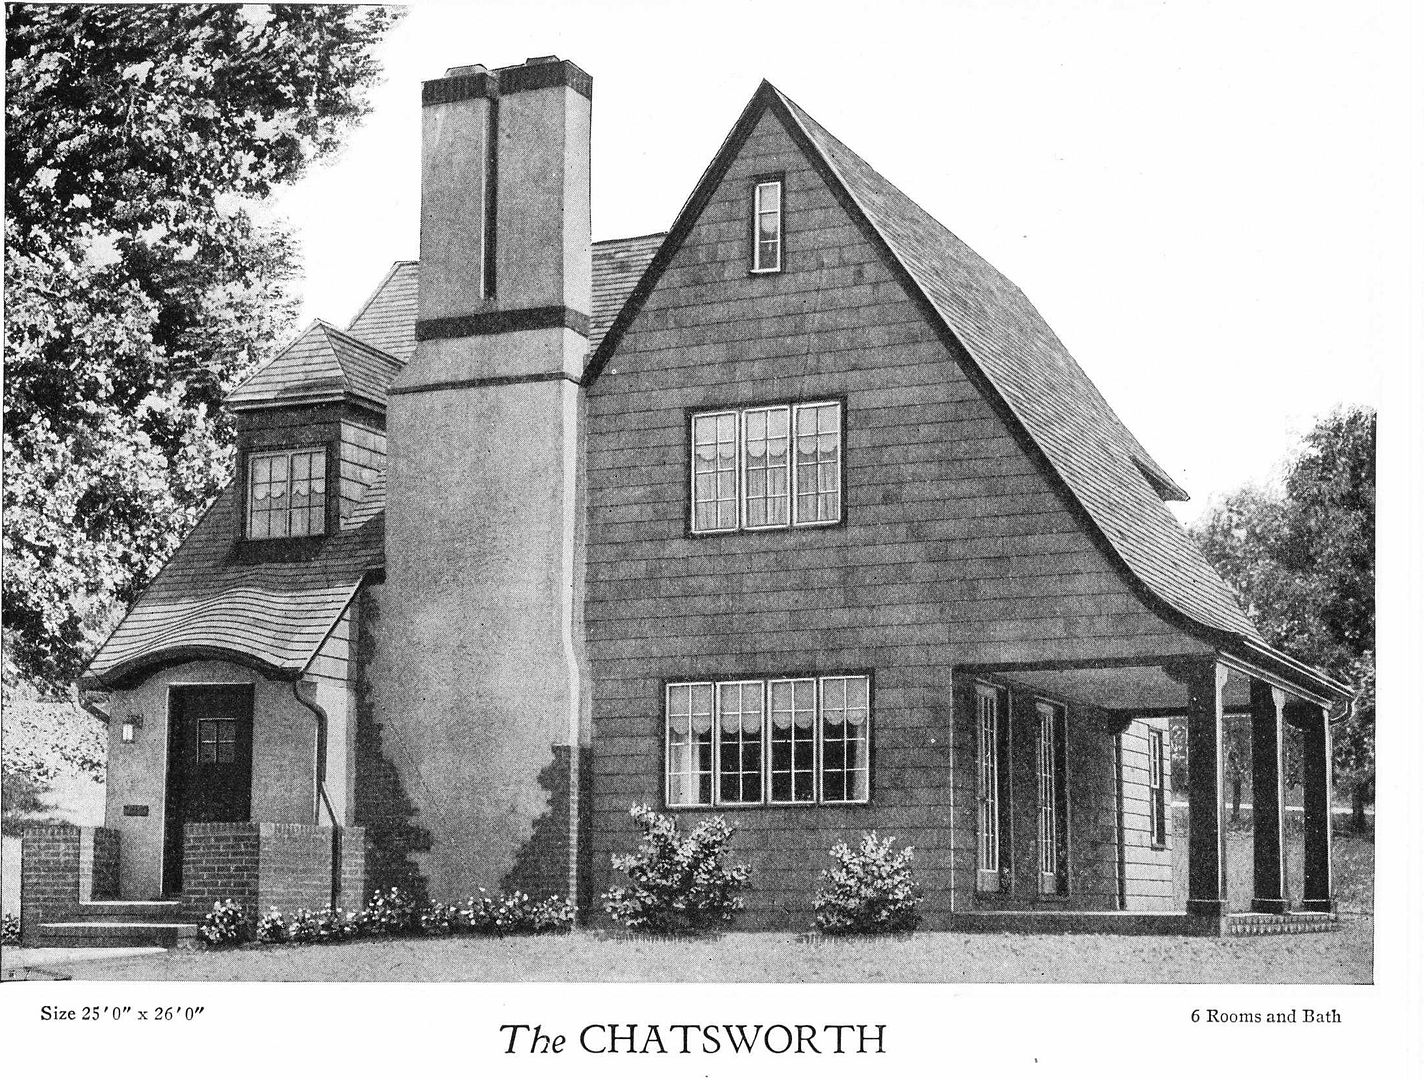 And heres a view of the house as seen in the 1927 Homebuilders Catalog. 